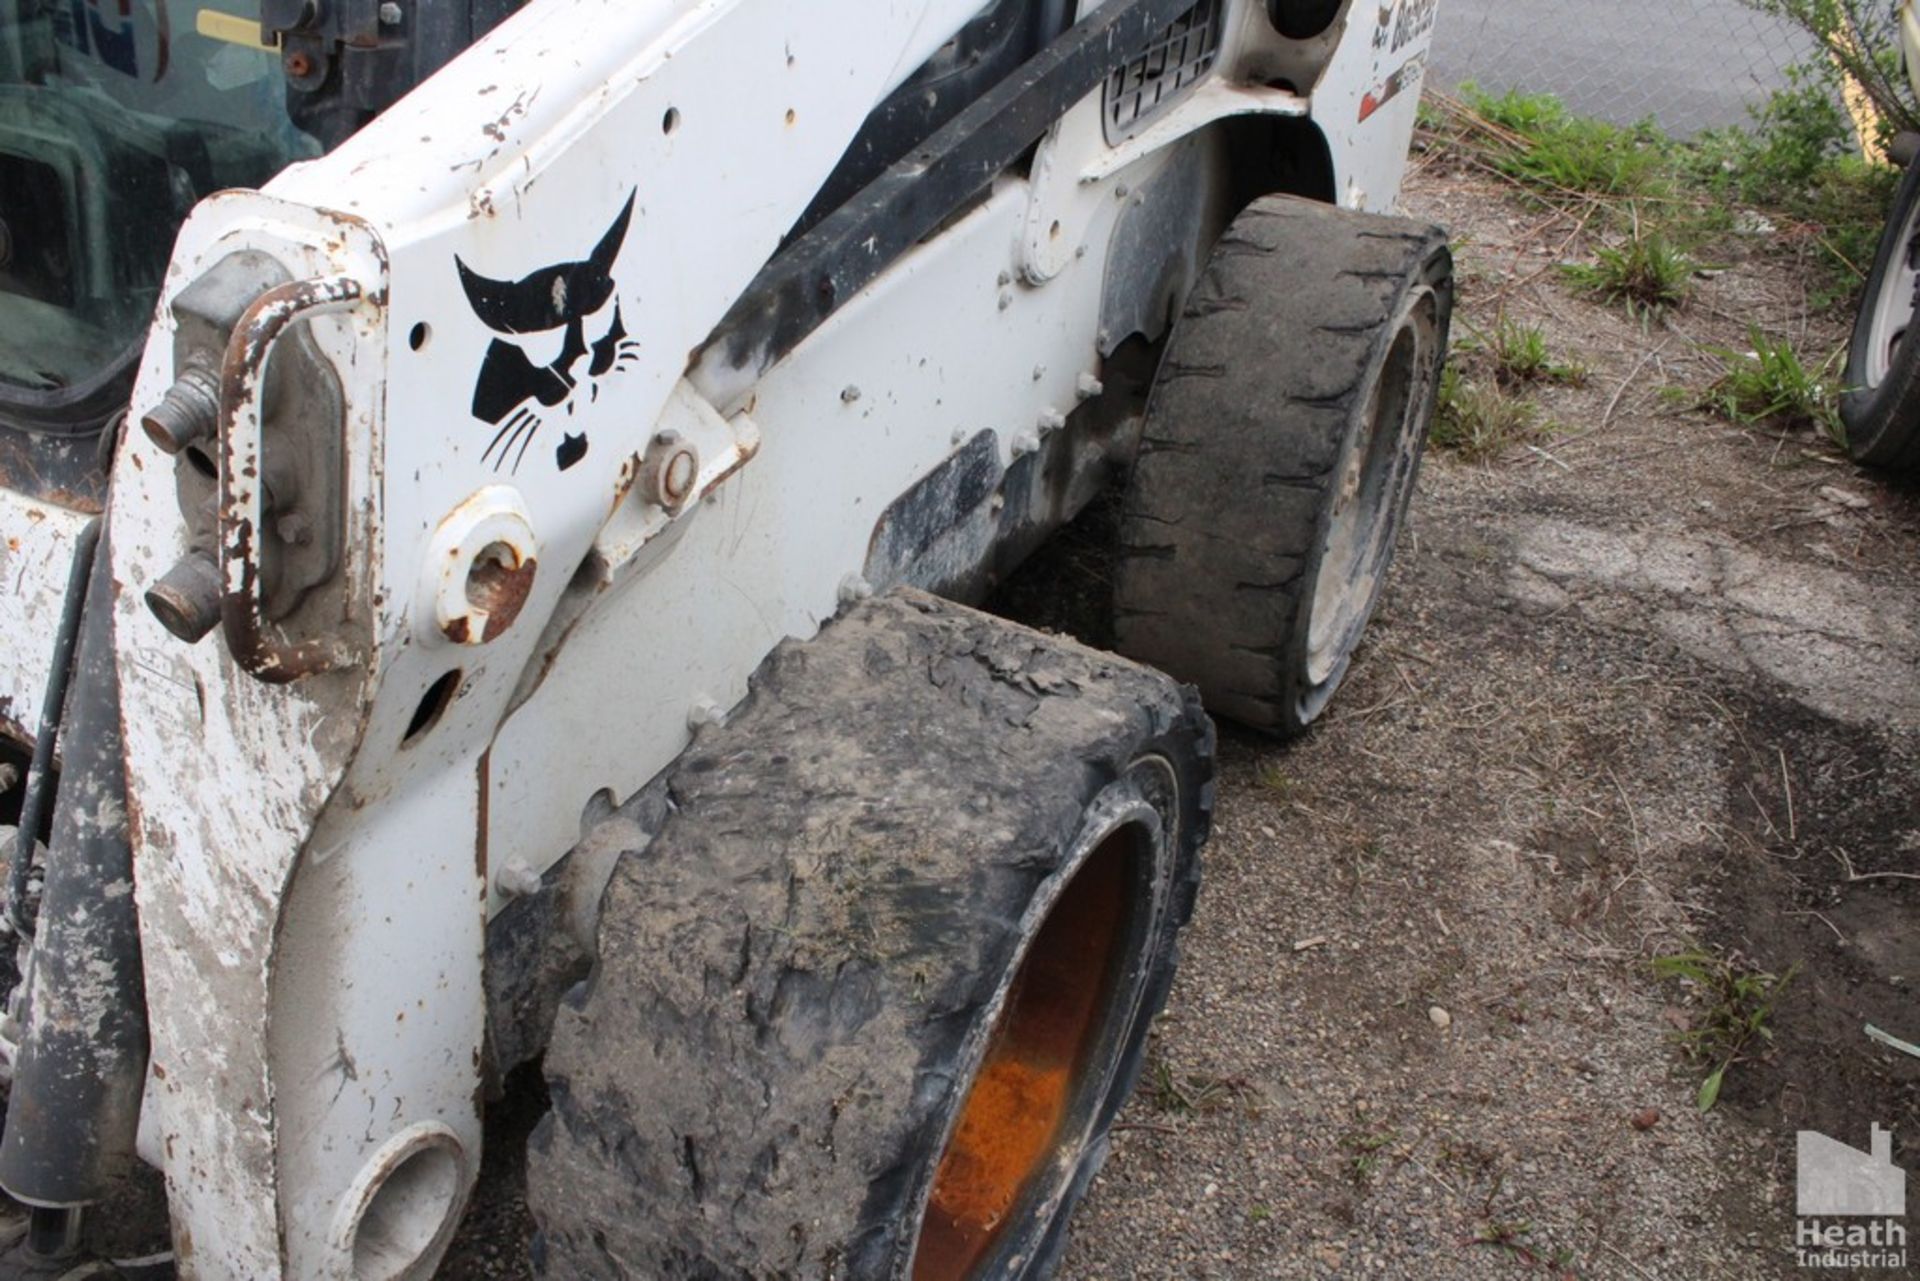 BOBCAT S750 SKID LOADER, 5,371 HOURS ON METER, SOLID TIRES, TRI-PIPE AUXILLARY HYDRAULICS, HYDRAULI - Image 5 of 8